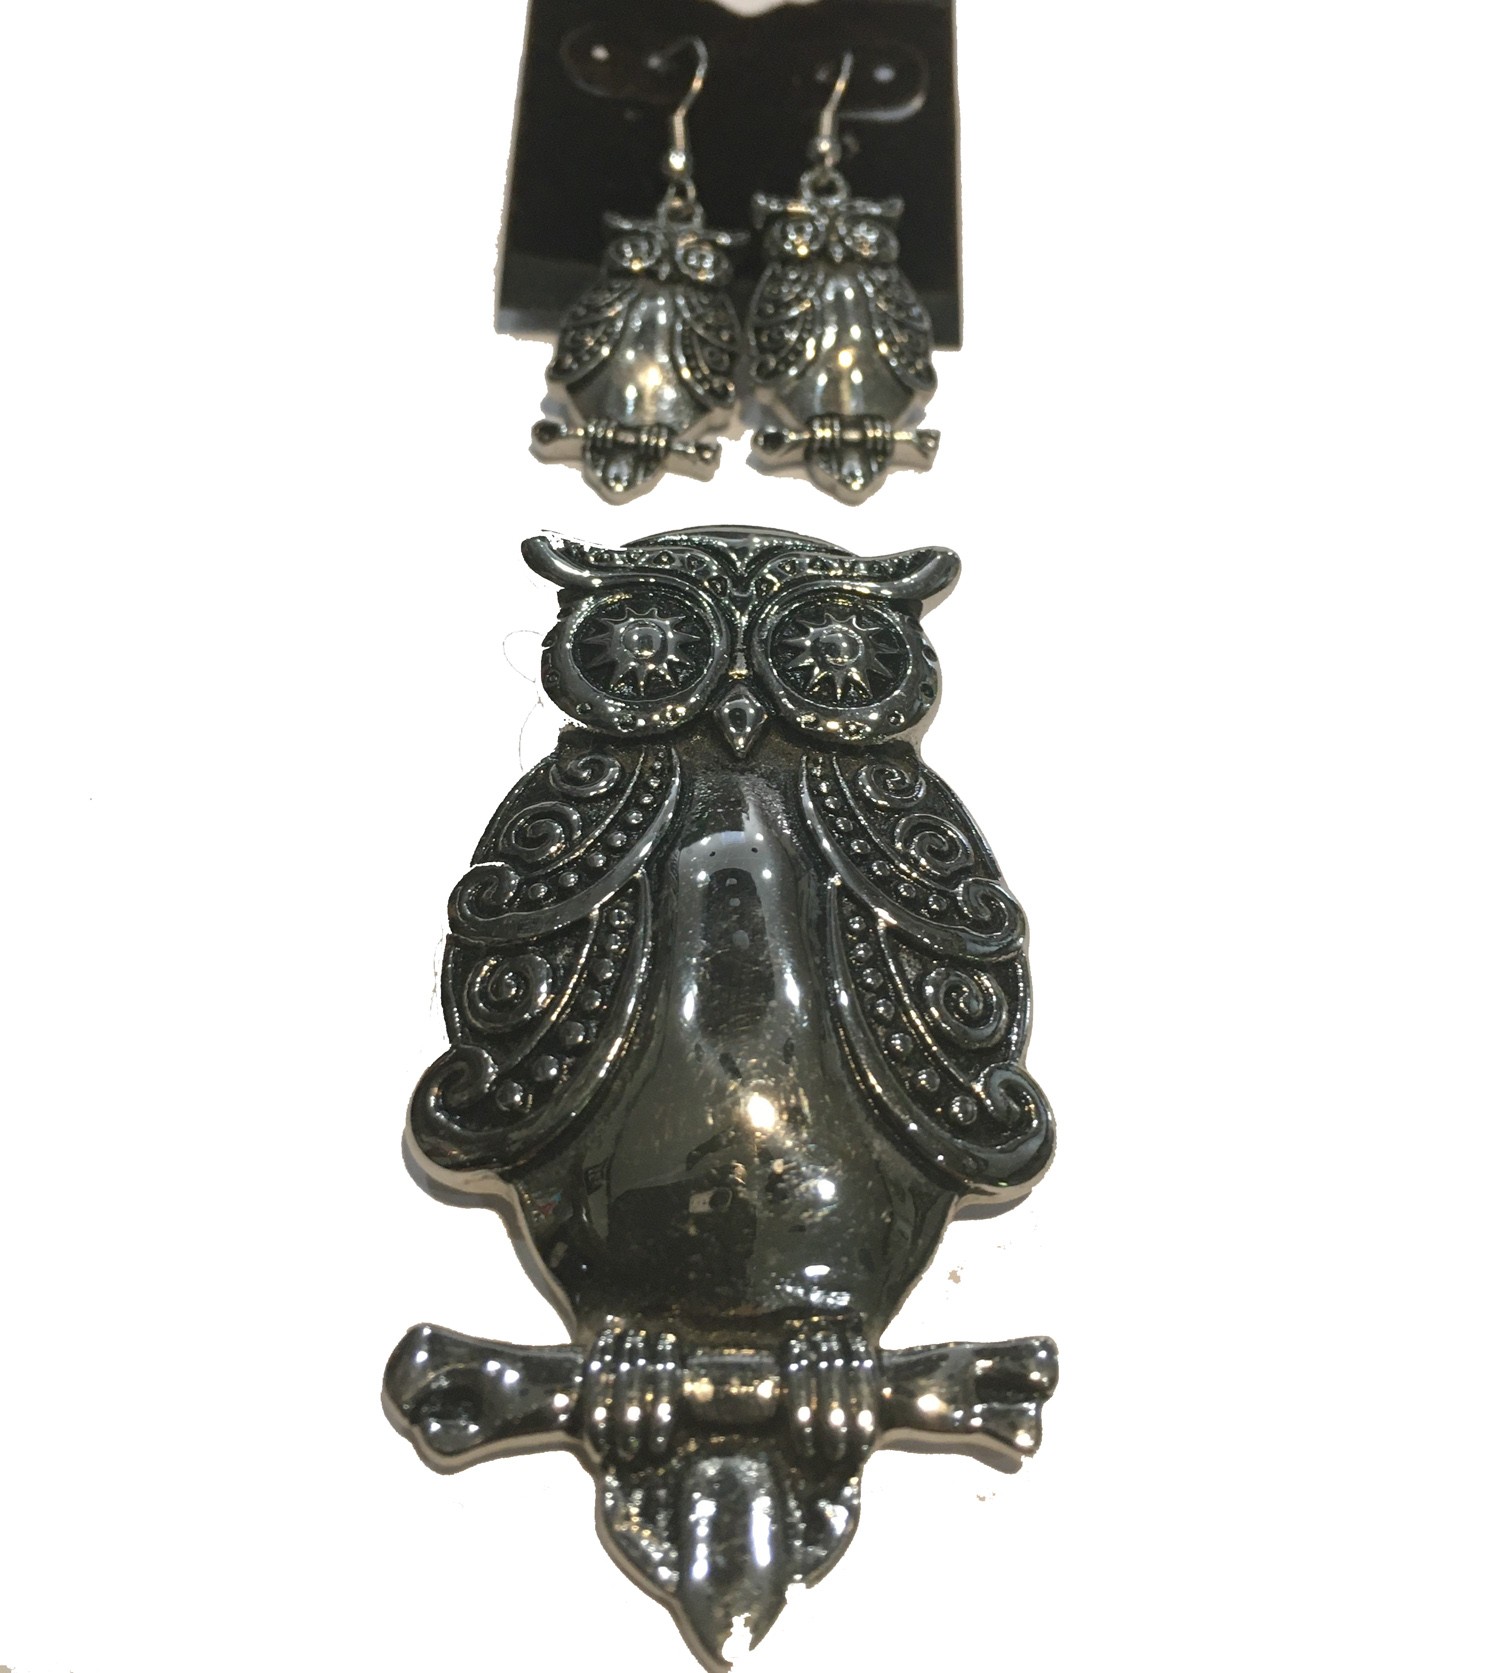 OWL PENDANT WITH MATCHING EARRINGS STAINLESS STEEL